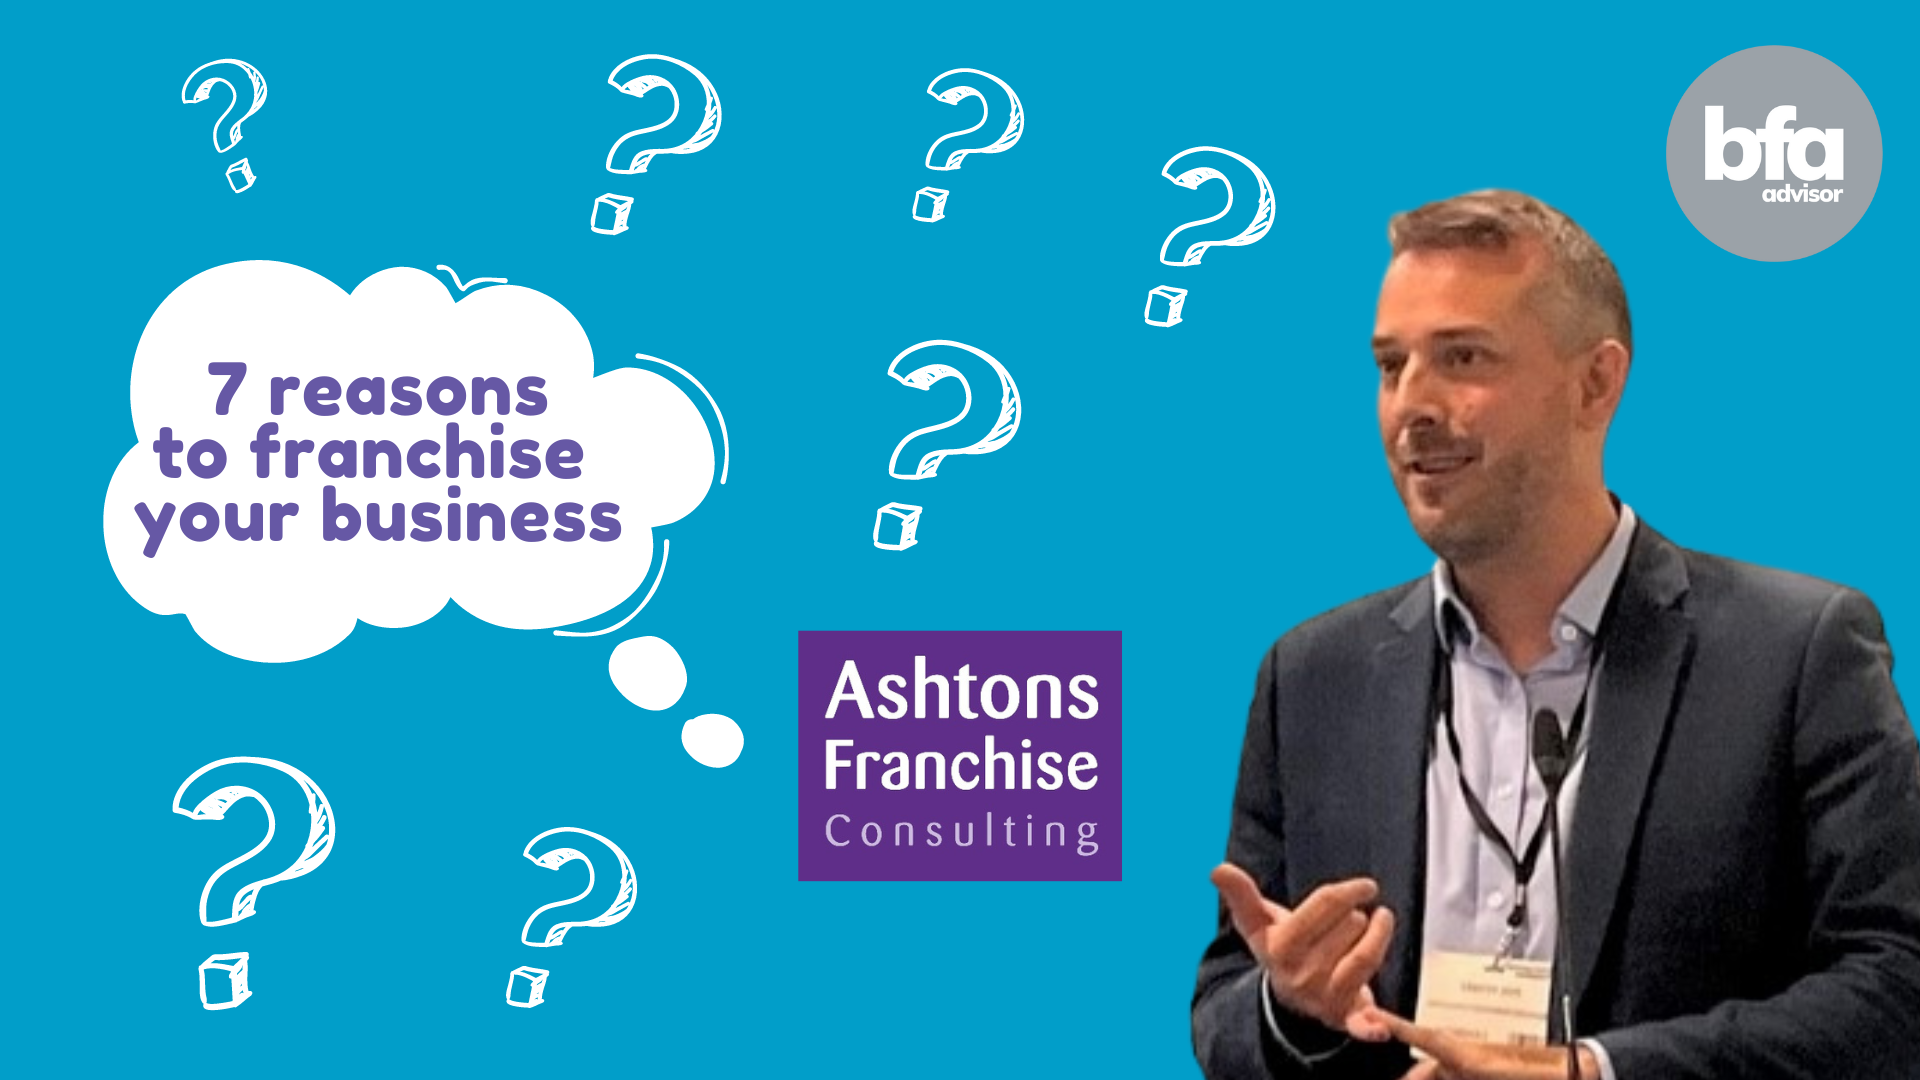 Why Franchise? We have seven reasons at Ashtons Franchise Consulting